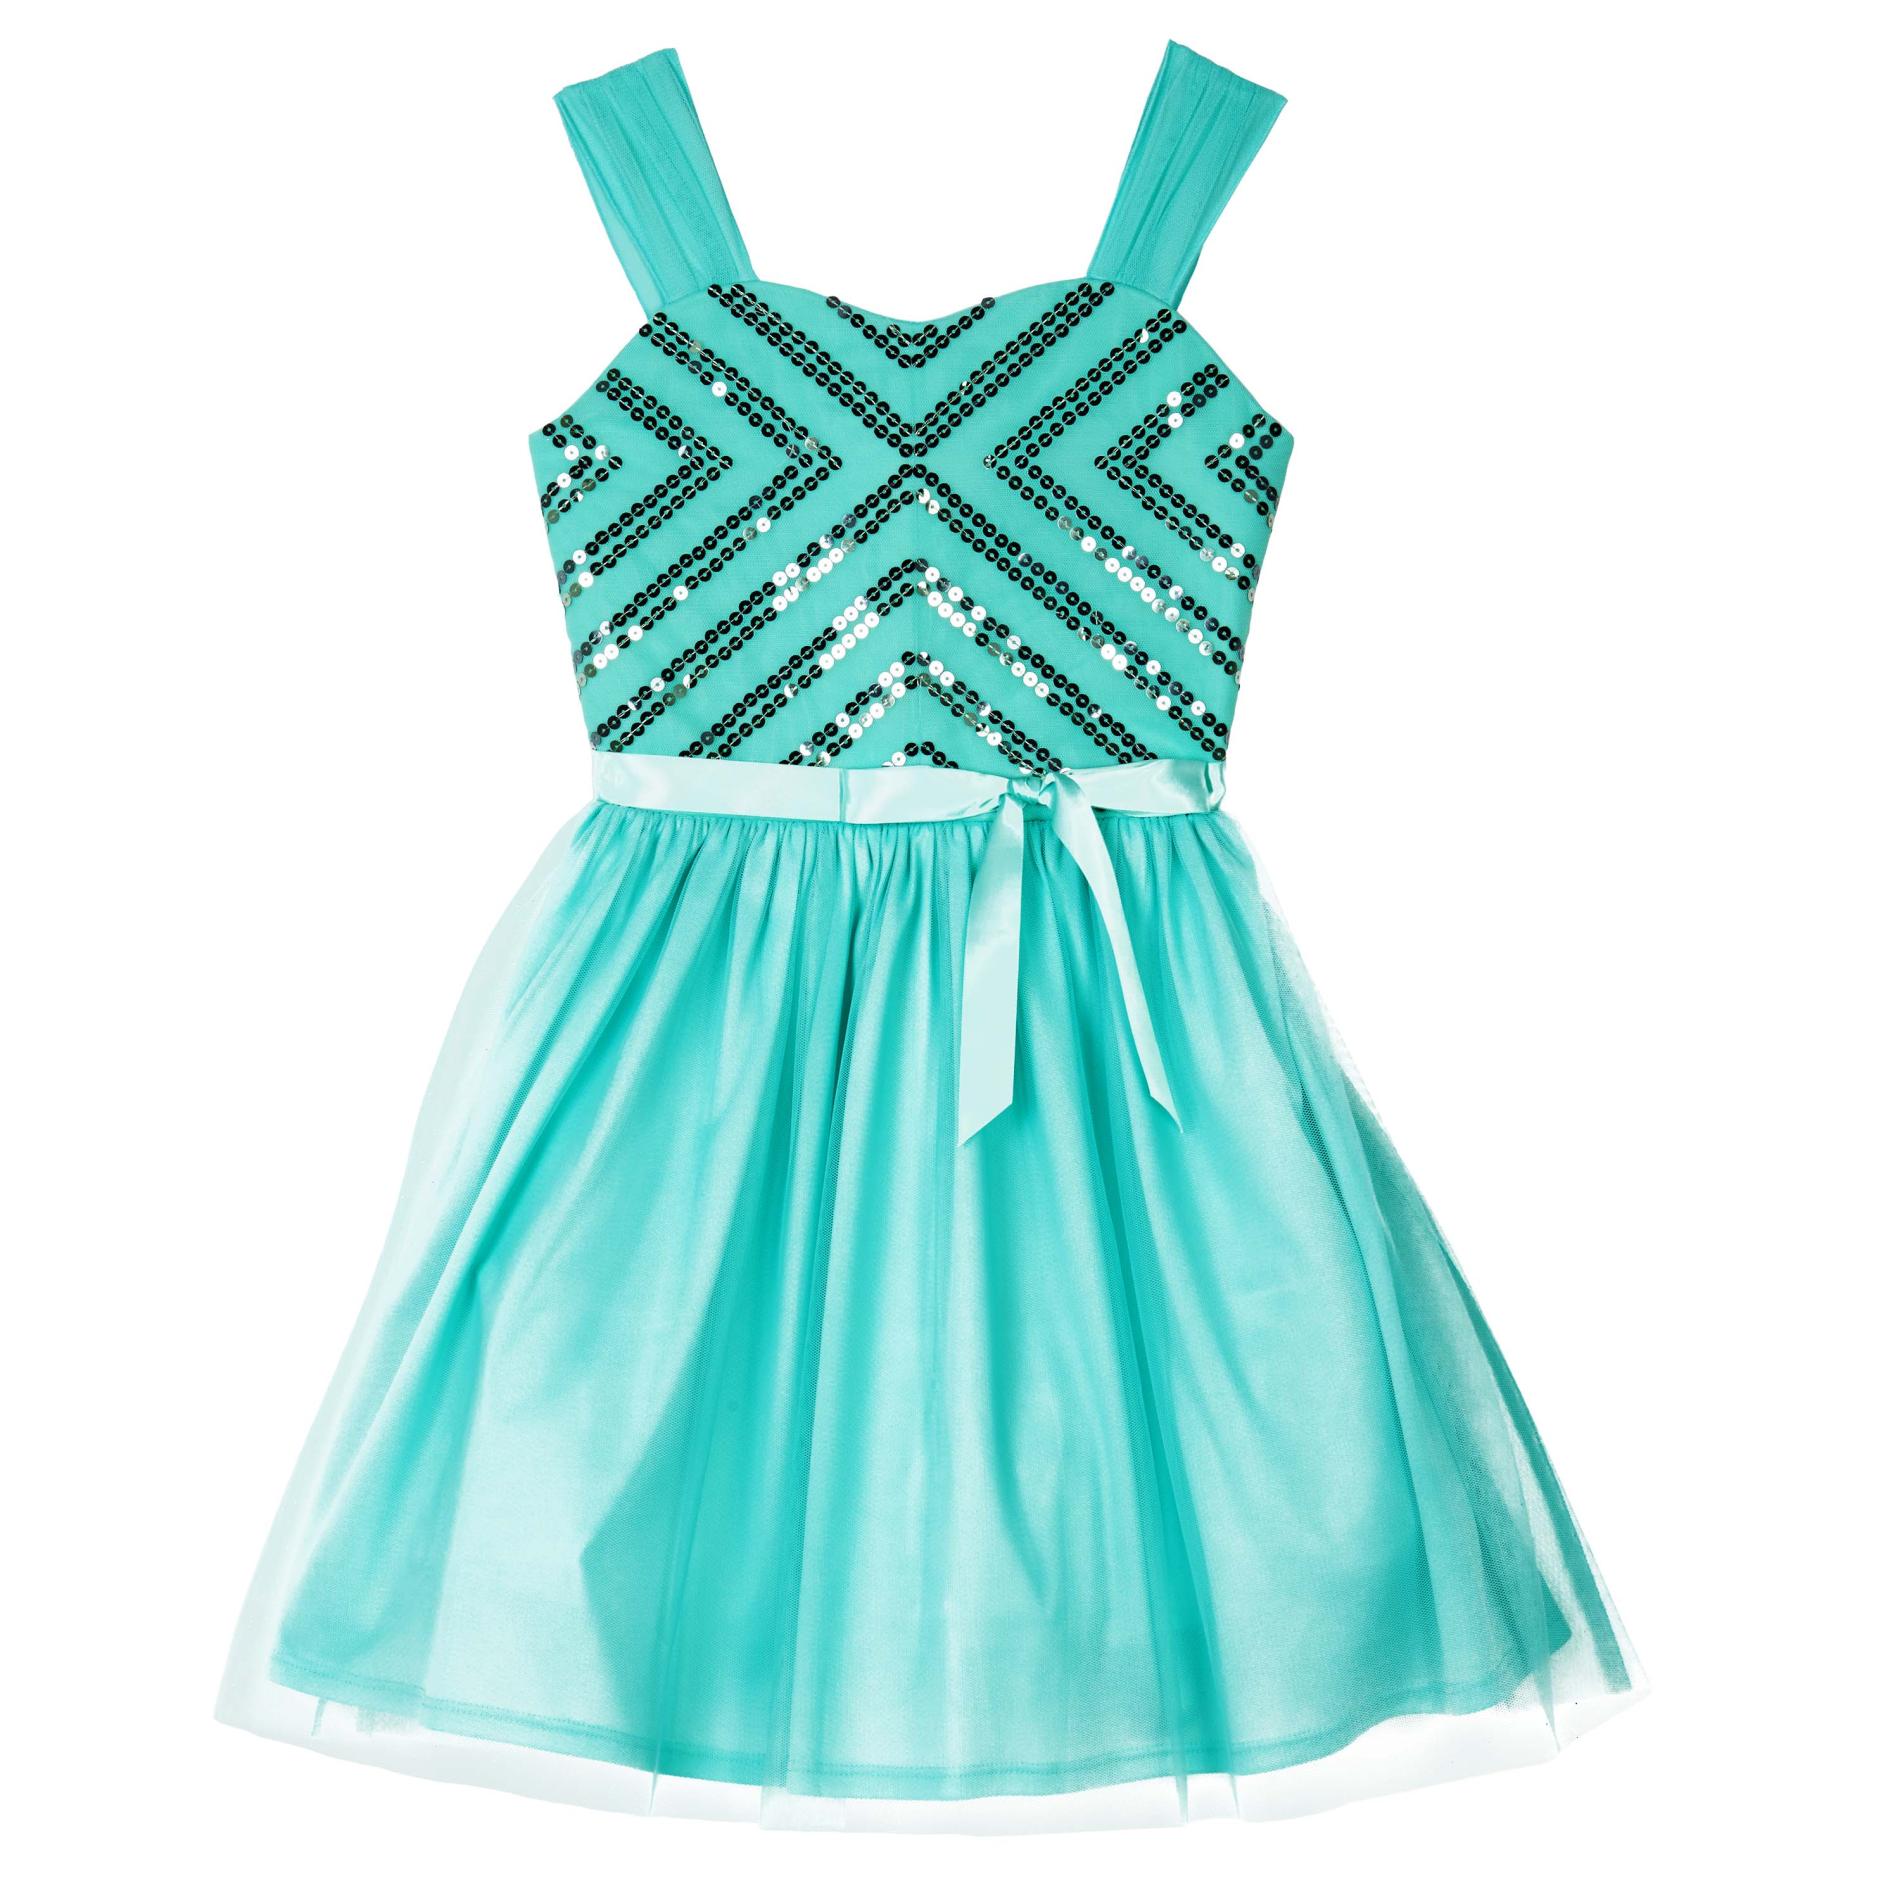 Amy's Closet Girl's Sequin Bodice Party Dress